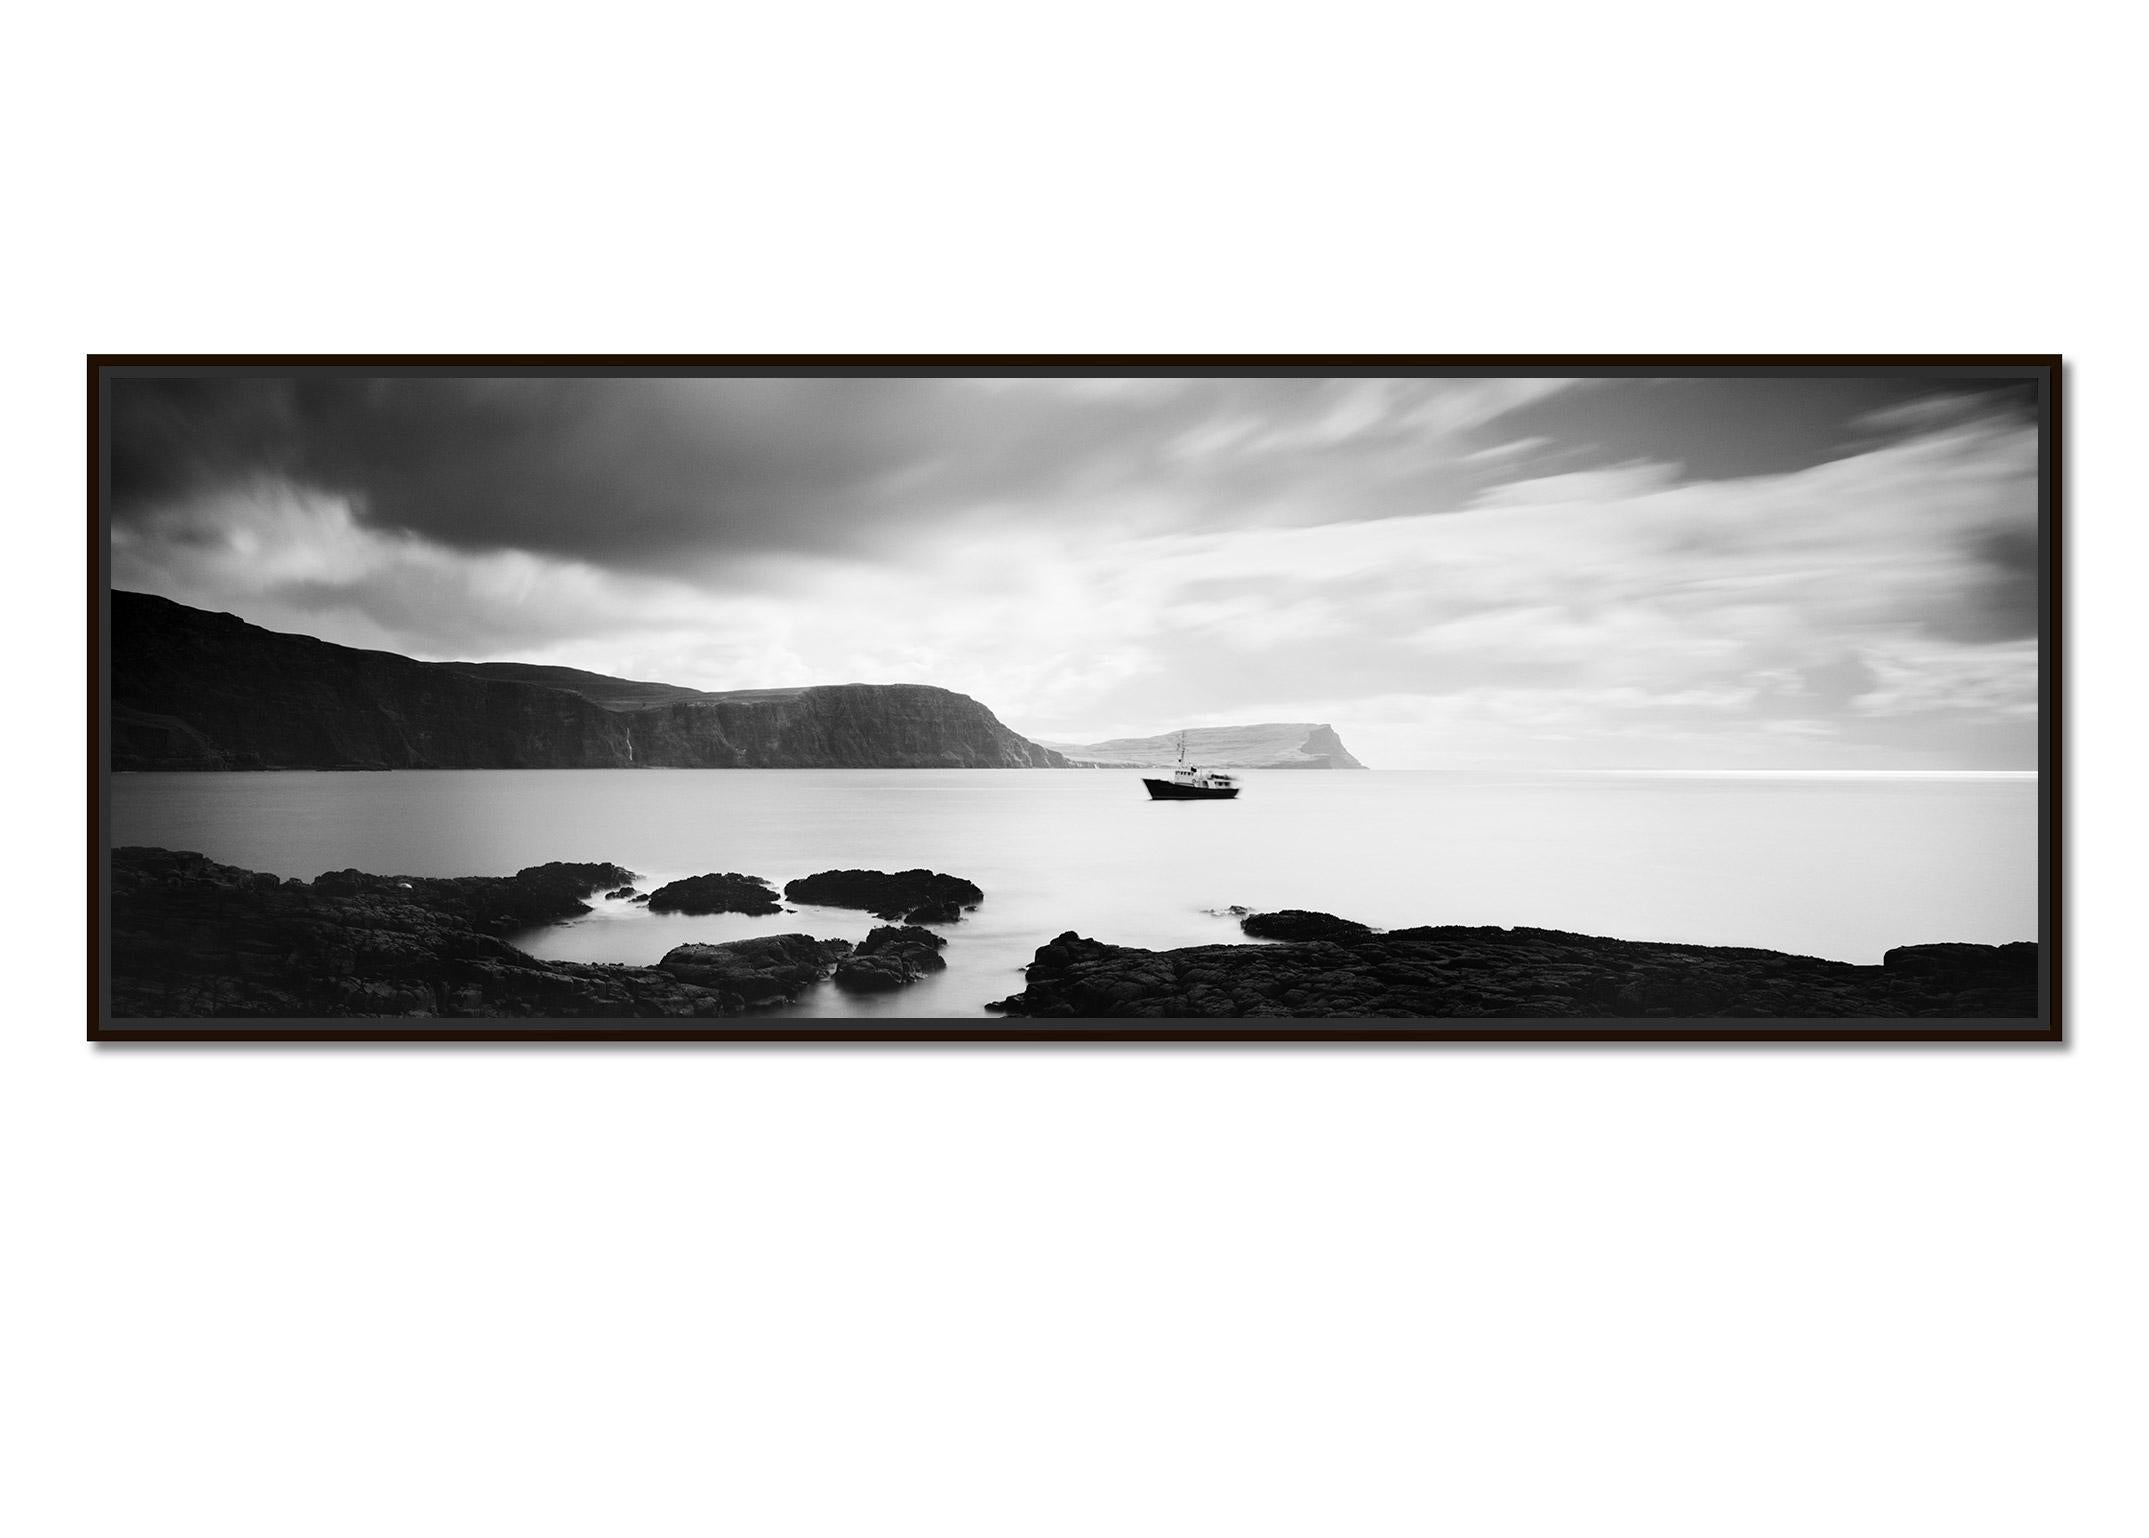 Fishing Boat Panorama, shoreline, Scotland, black white waterscape photography - Photograph by Gerald Berghammer